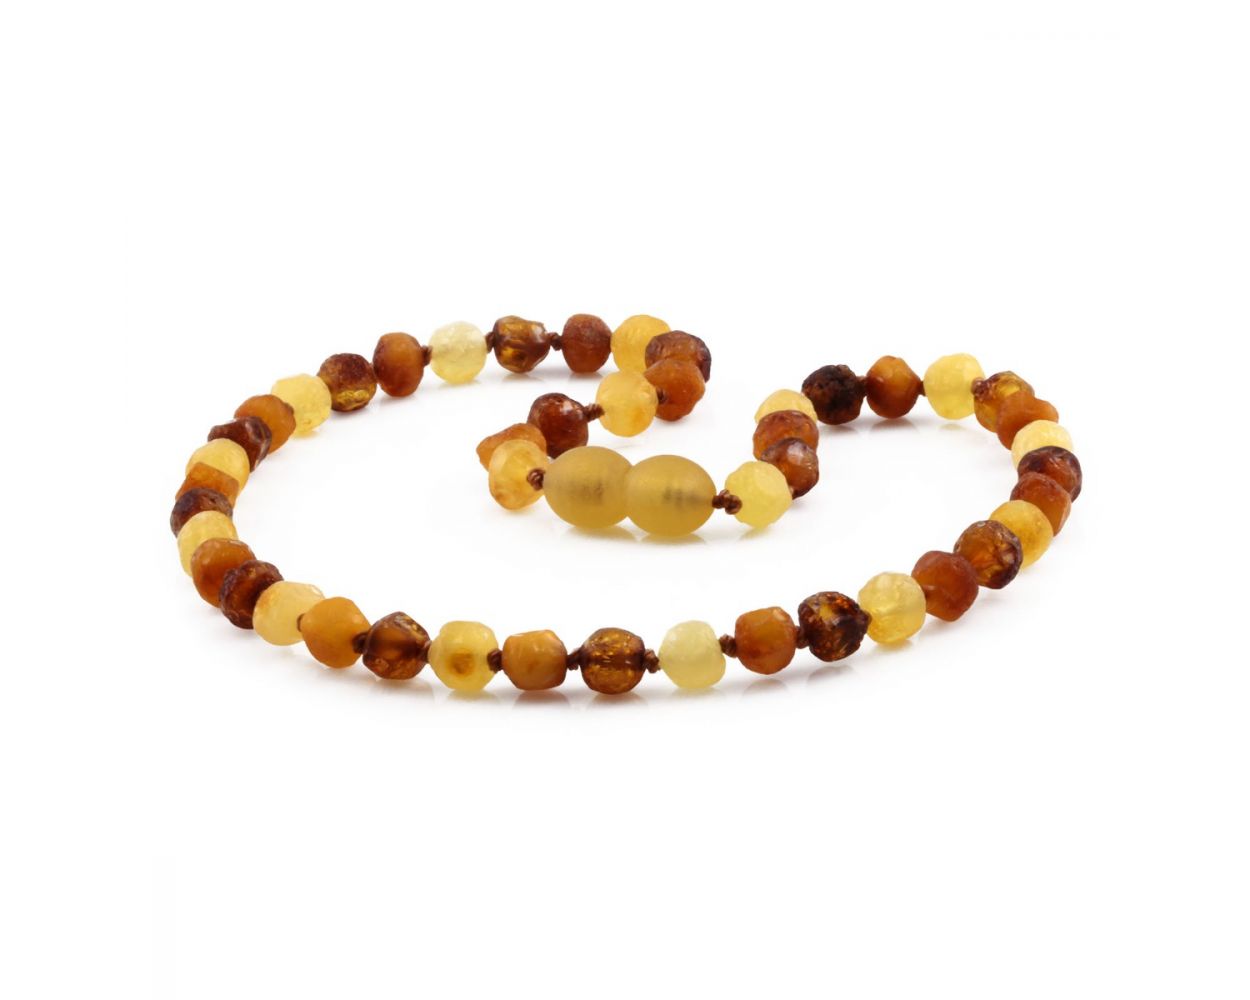 Buy Adult Baltic Amber Necklace With Glossy Amber Beads - Cognac And Butter  Color - Exclusive Round Beads (20) at Amazon.in